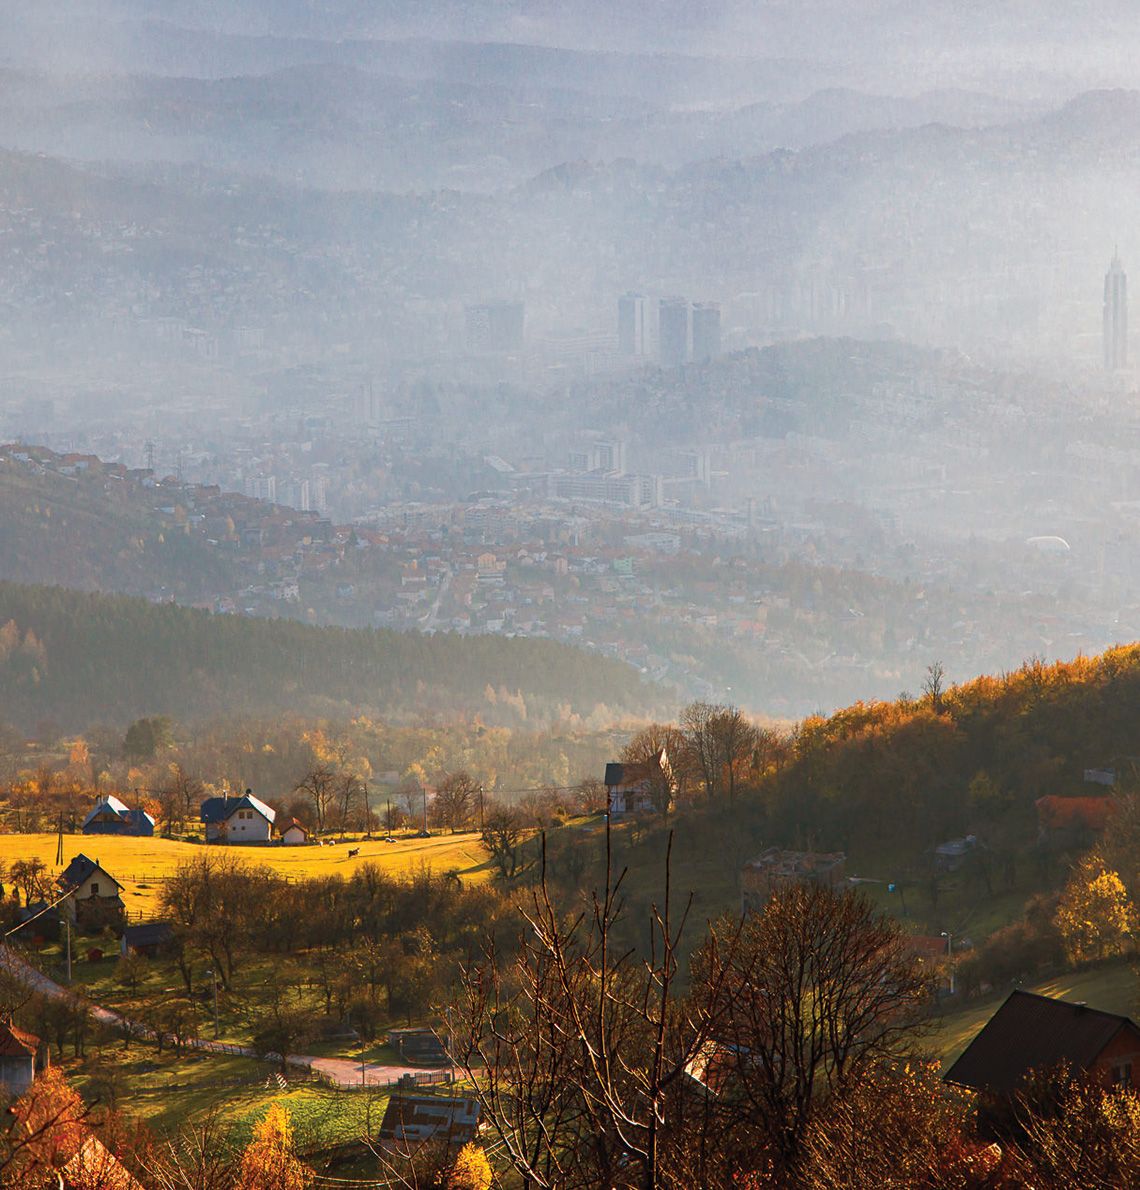 Supporting the Transition of Coal Regions in BiH